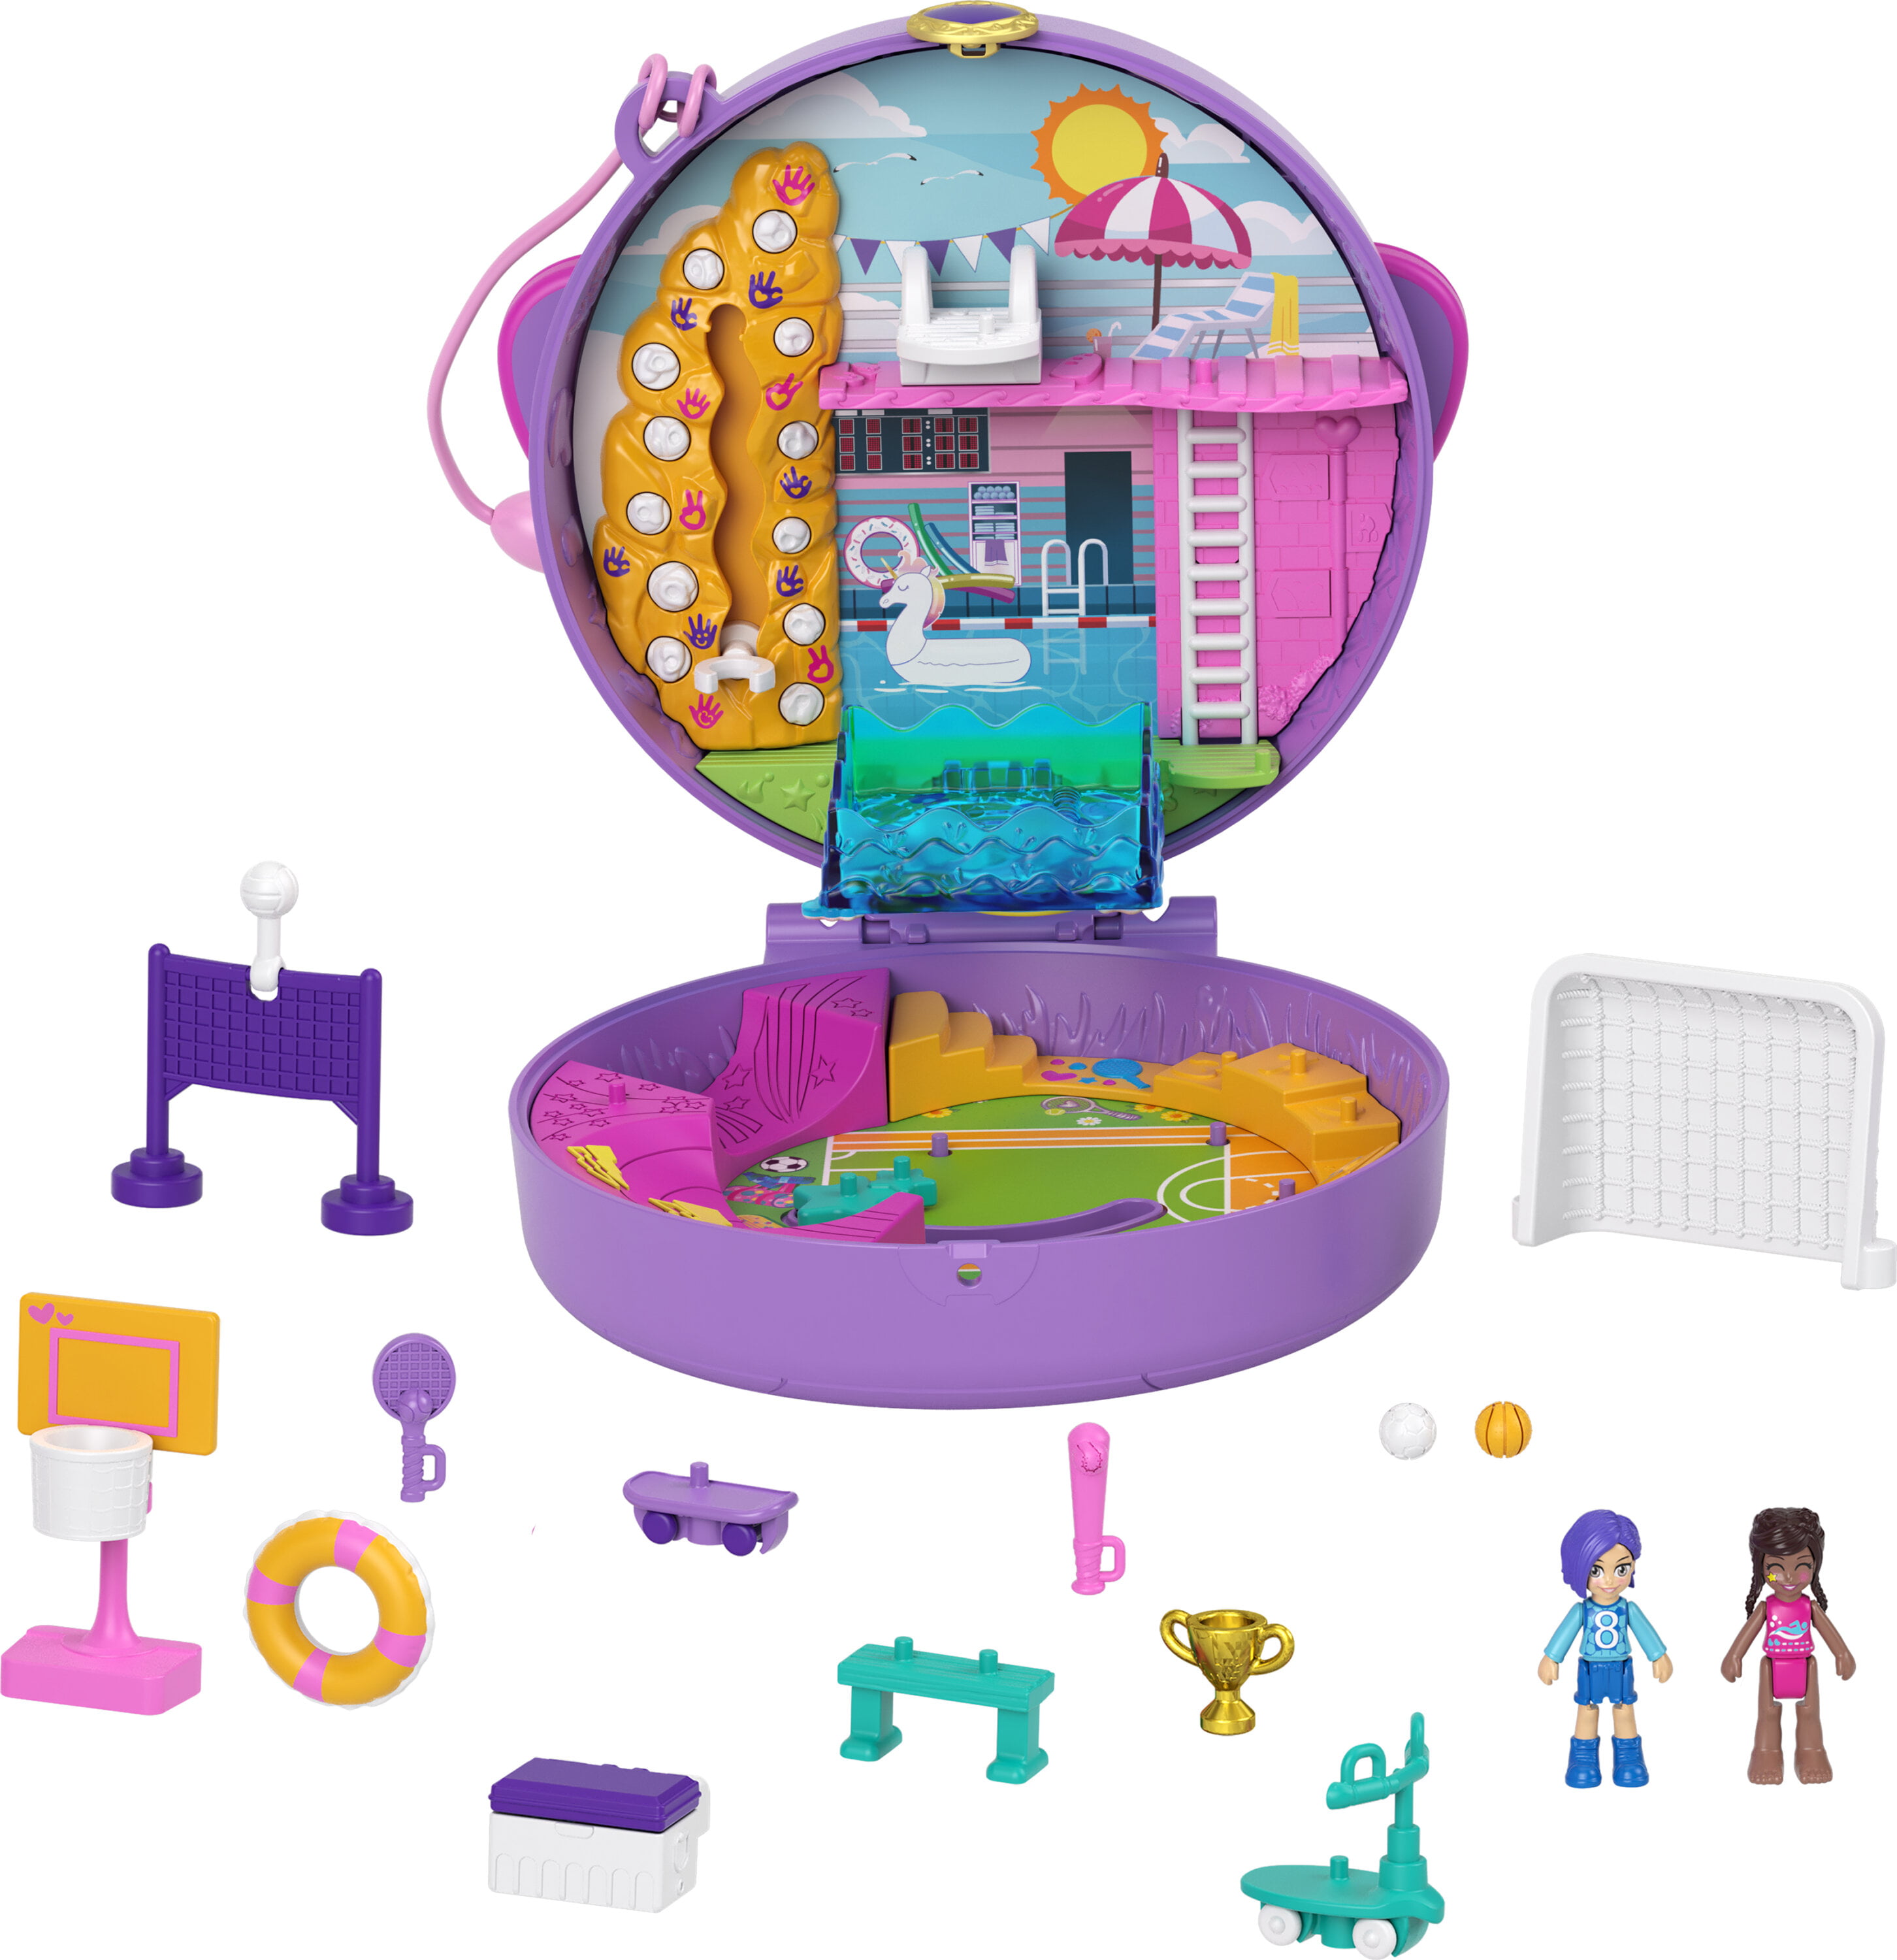 Mattel Polly Pocket Teeny Compact Micro Doll Blind Bag Party Filler Cake Topper 